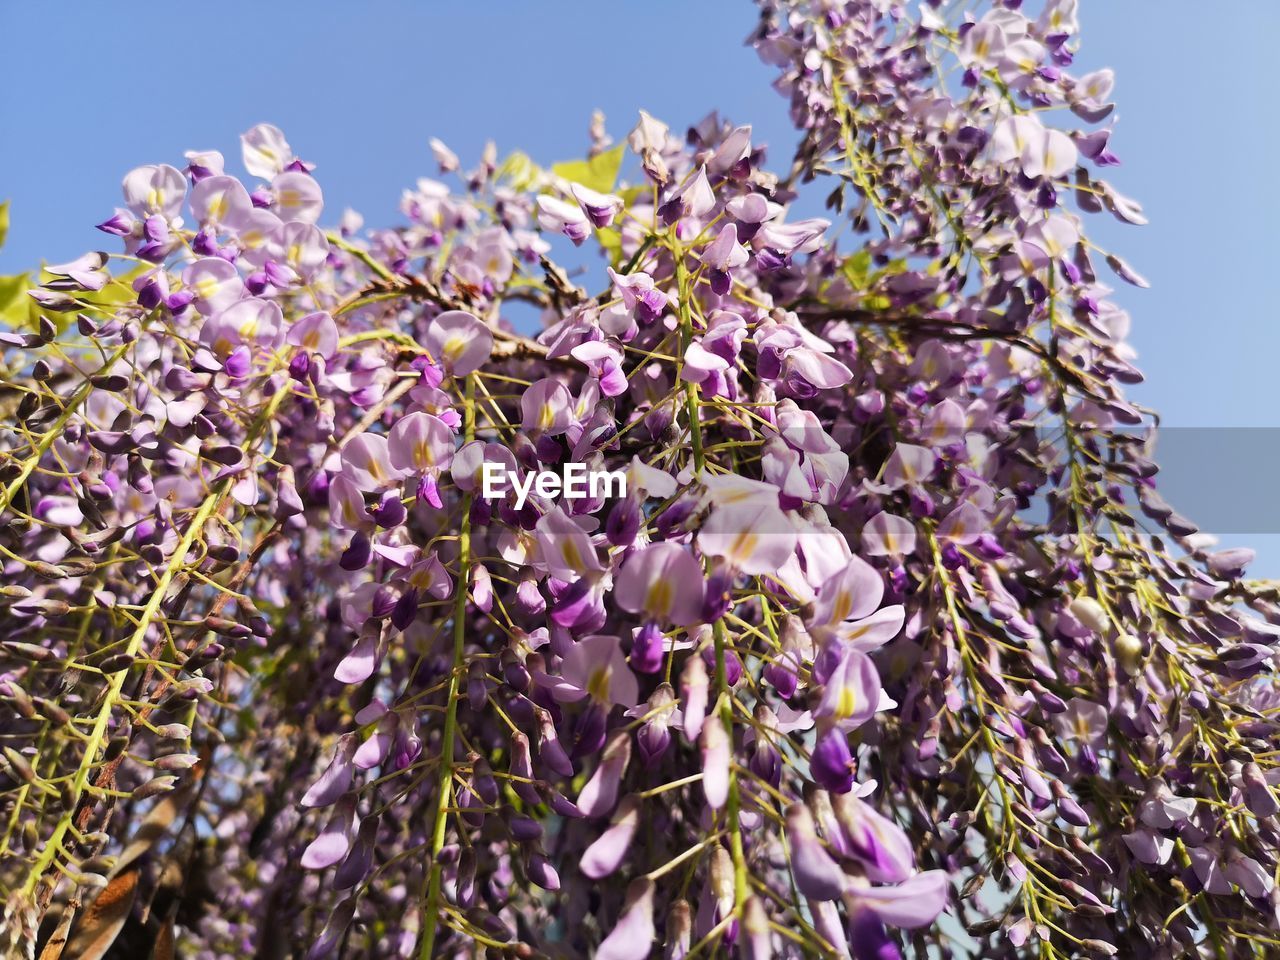 plant, flower, flowering plant, growth, beauty in nature, nature, blossom, lilac, freshness, sky, tree, low angle view, fragility, purple, no people, springtime, spring, day, clear sky, branch, shrub, pink, outdoors, close-up, wildflower, wisteria, botany, sunlight